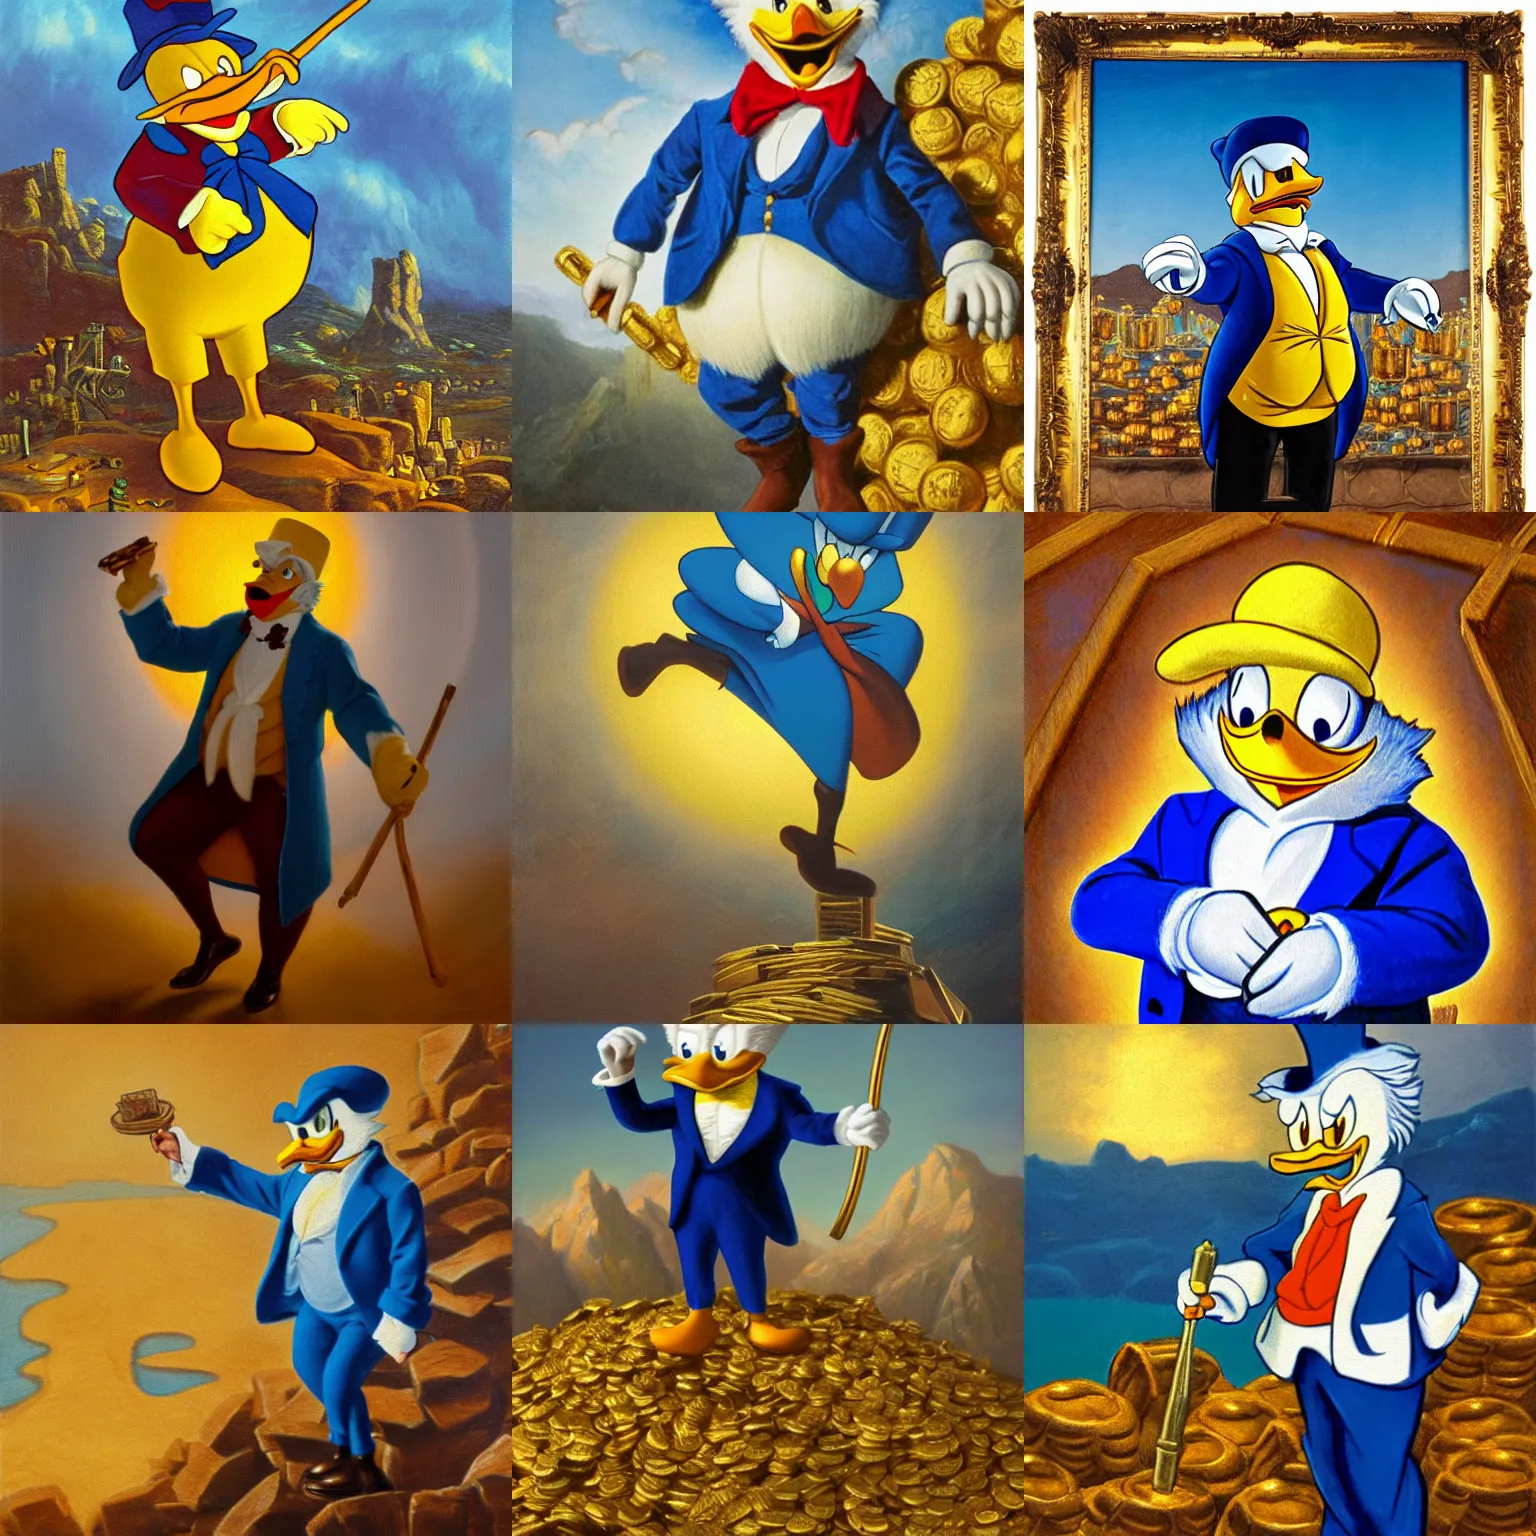 Prompt: Scrooge McDuck from the Duck Tales in blue costume standing on a mountain of gold and holding a cane, view from below, oil painting, highly detailed